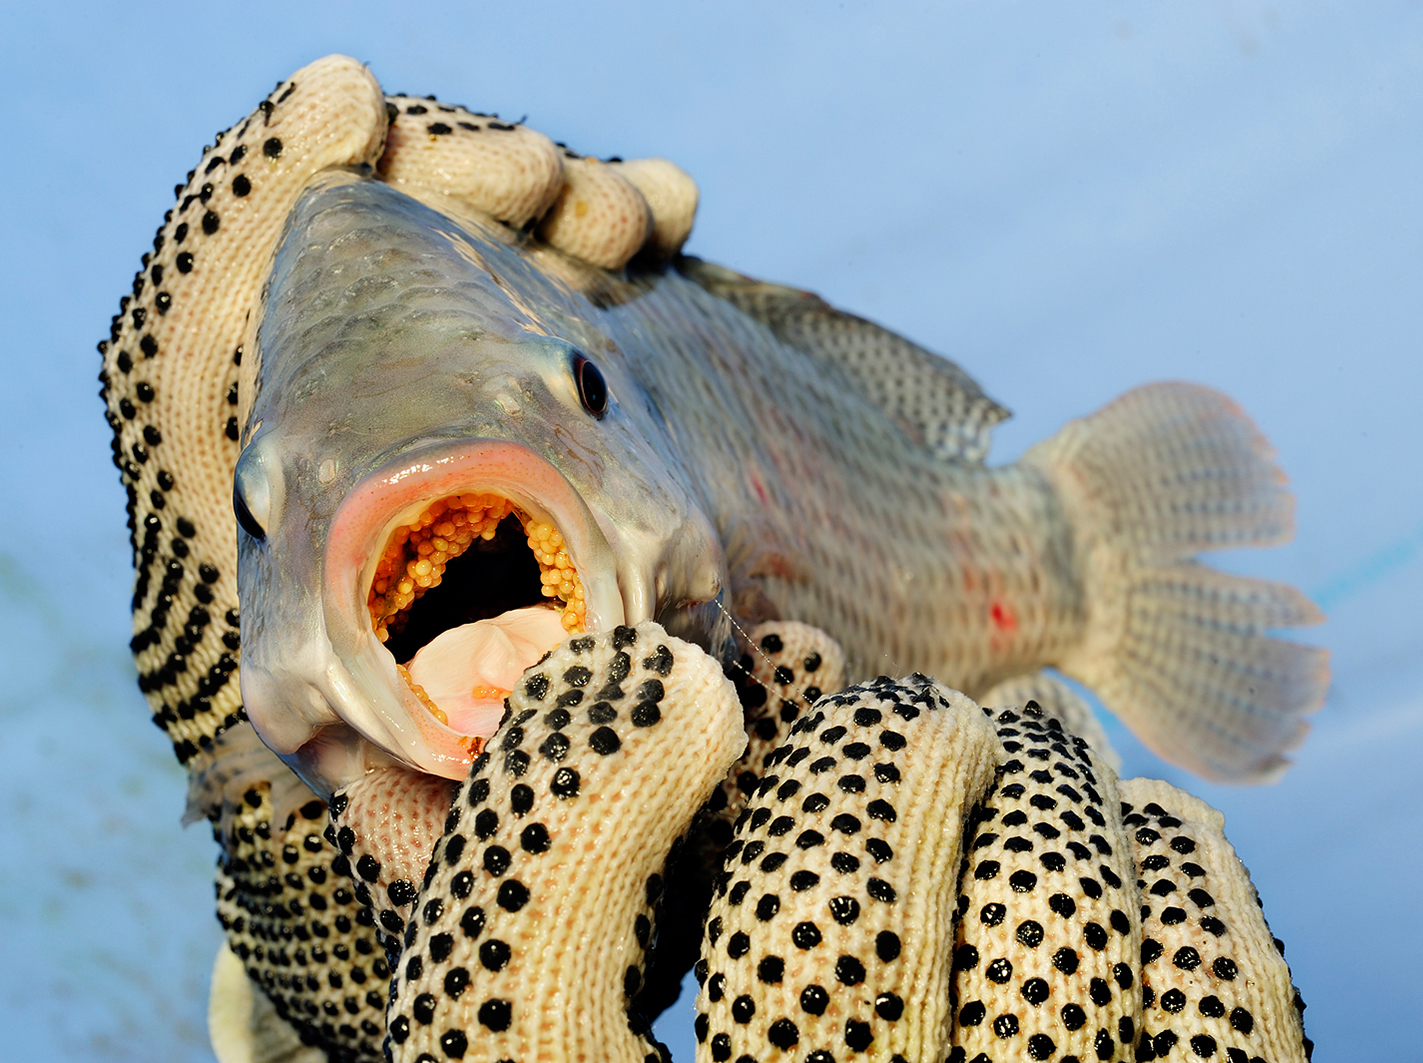 Picture of a tilapia with a mouthful of eggs